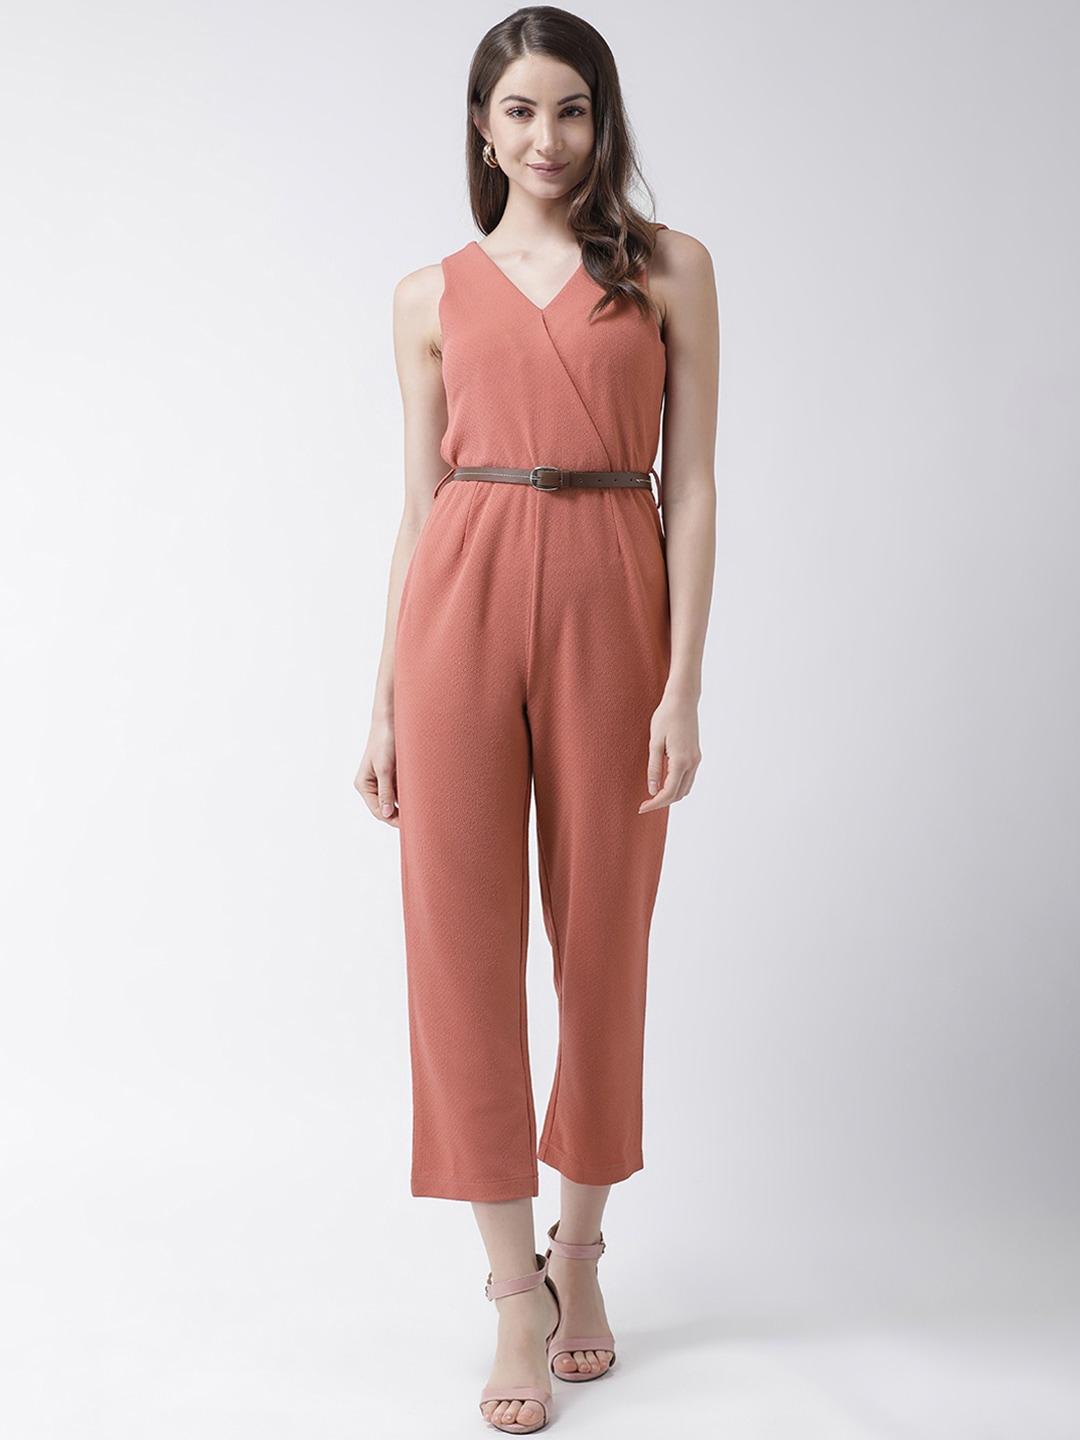 kassually-women-peach-coloured-solid-wrap-basic-jumpsuit